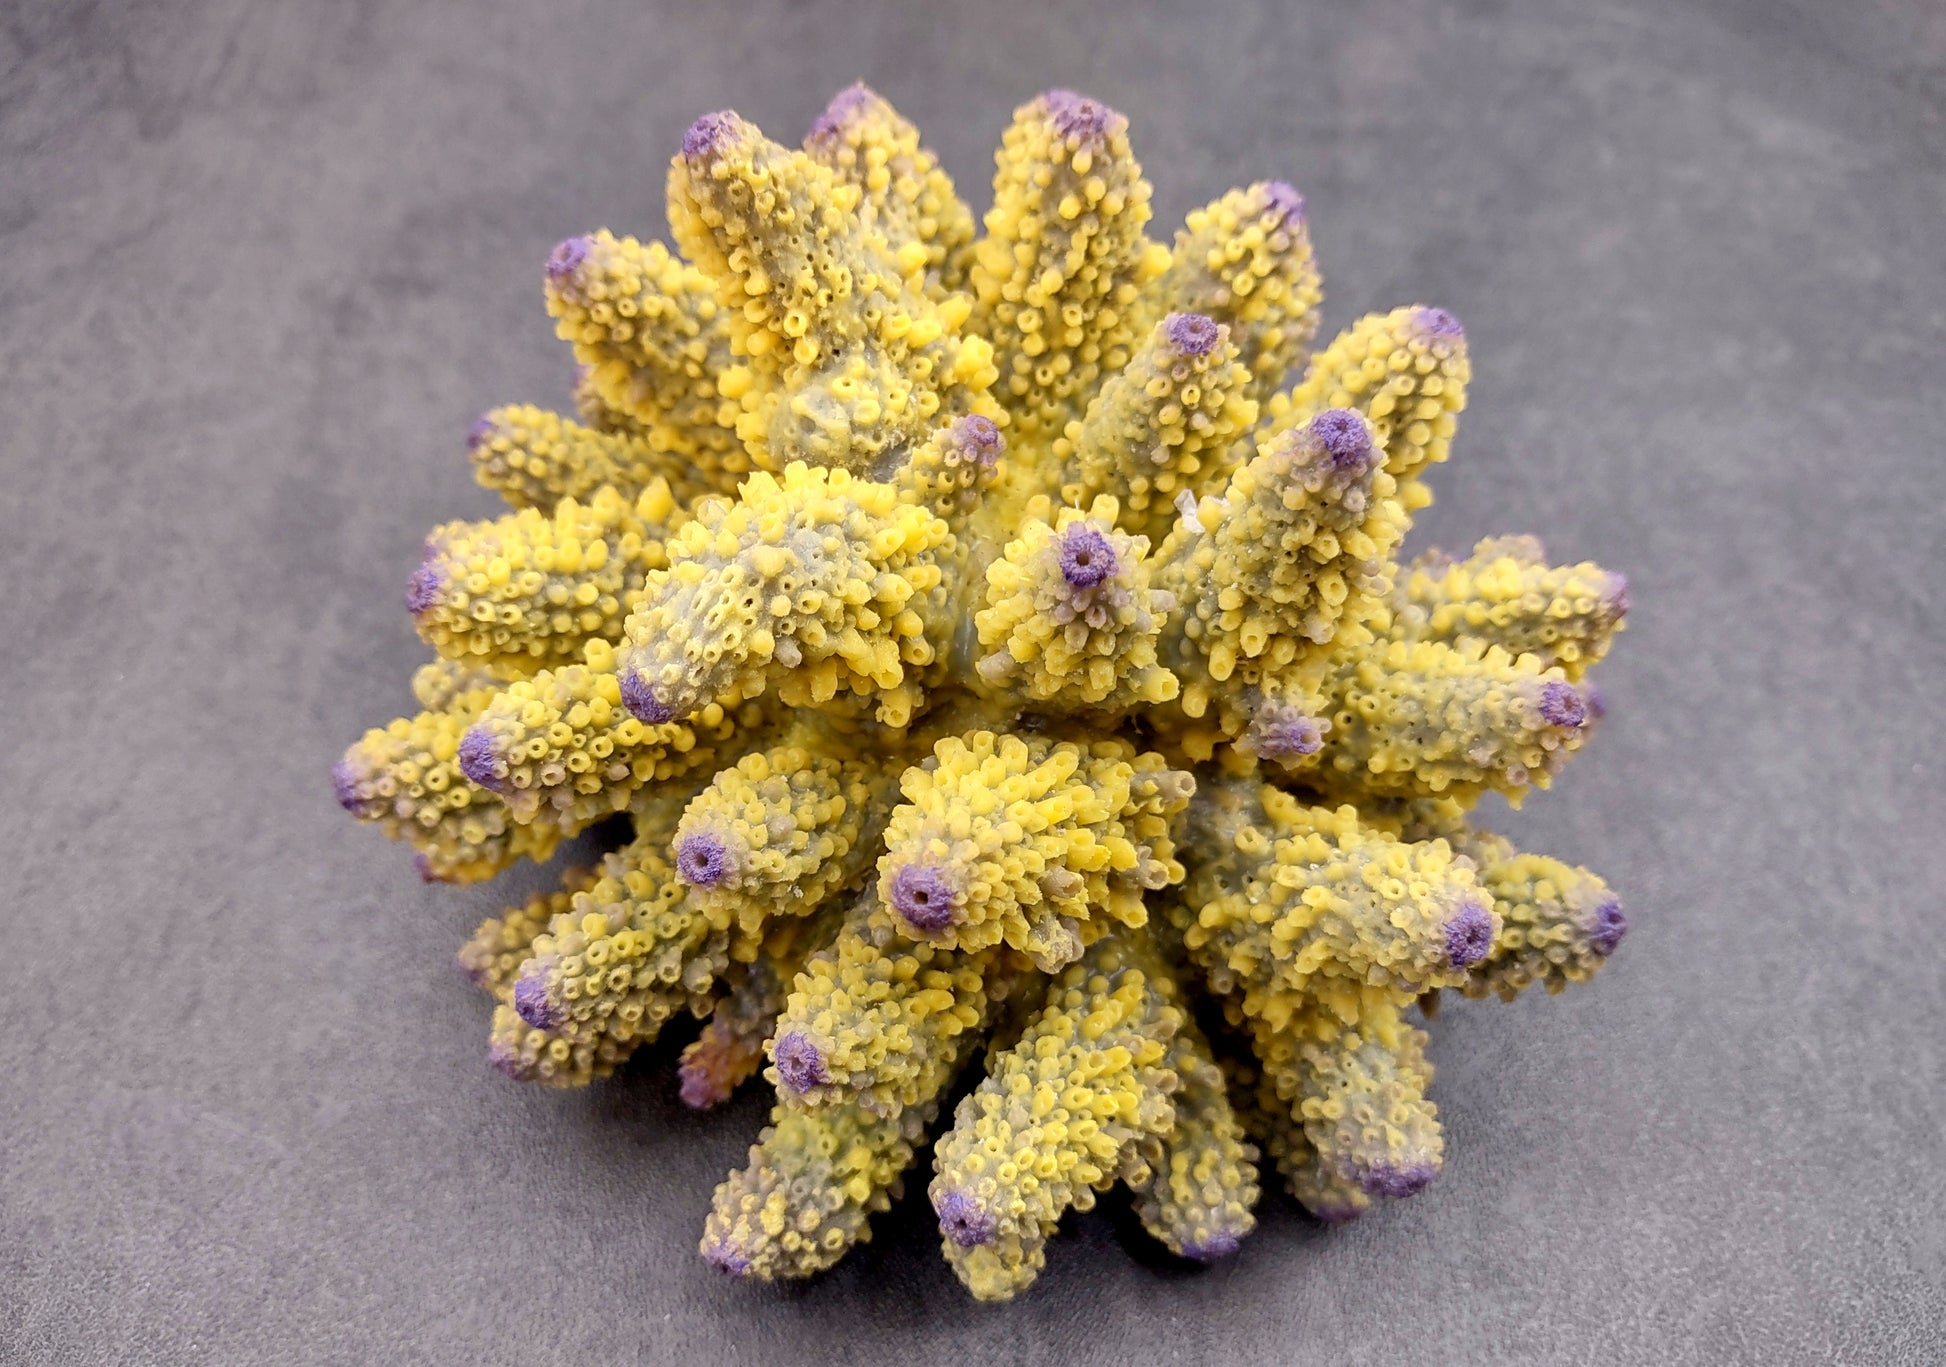  Yellow Finger Staghorn FAUX Coral - Acropora Humilis - (1 FAUX Coral approx. 5.5x3.5x5 inches). yellow and purple branched tentacles. Copyright 2024 SeaShellSupply.com.